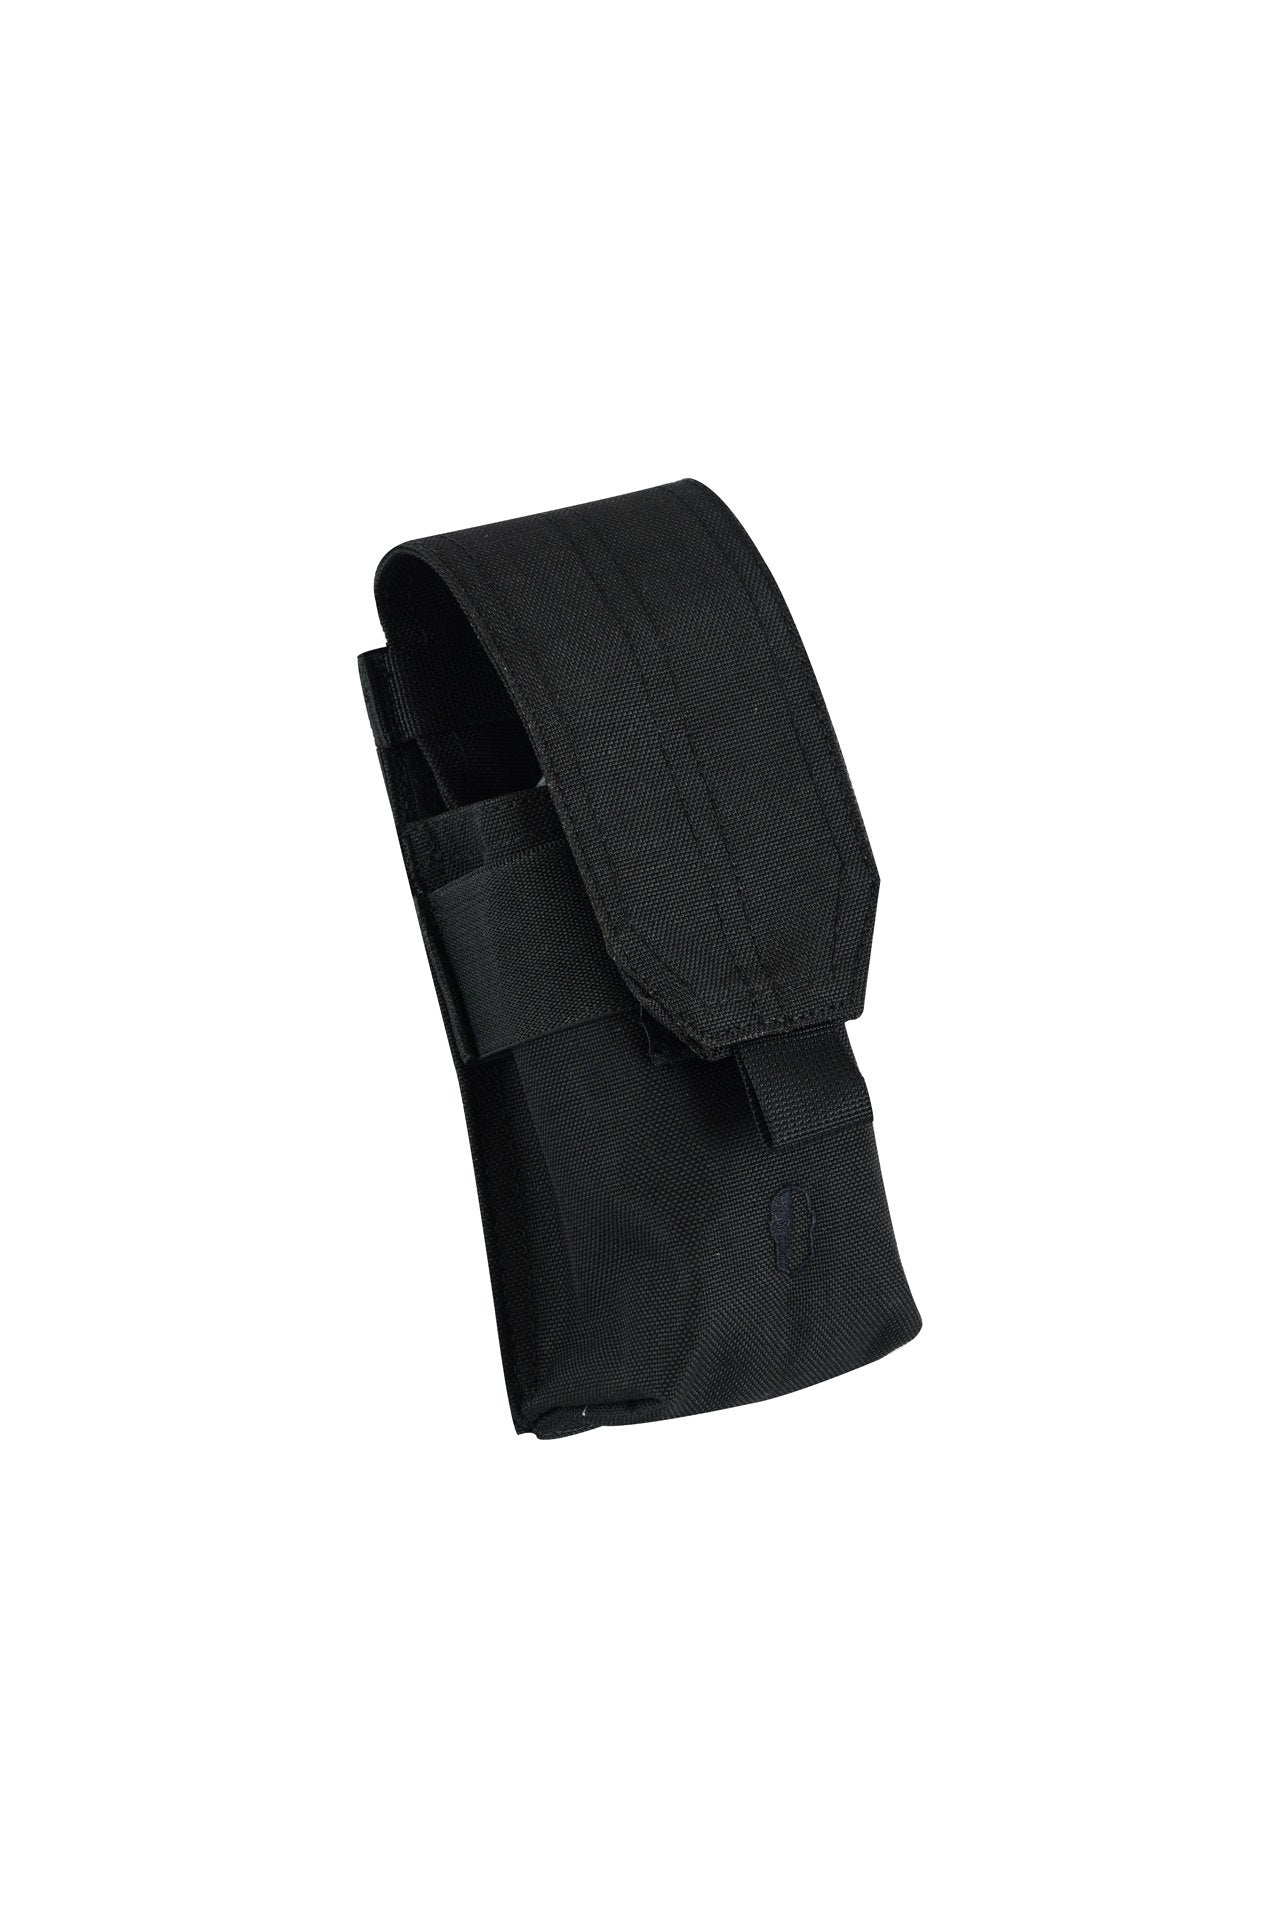 SHE-920 SINGLE M4 5.56MM MAG POUCH COLOR BLACK